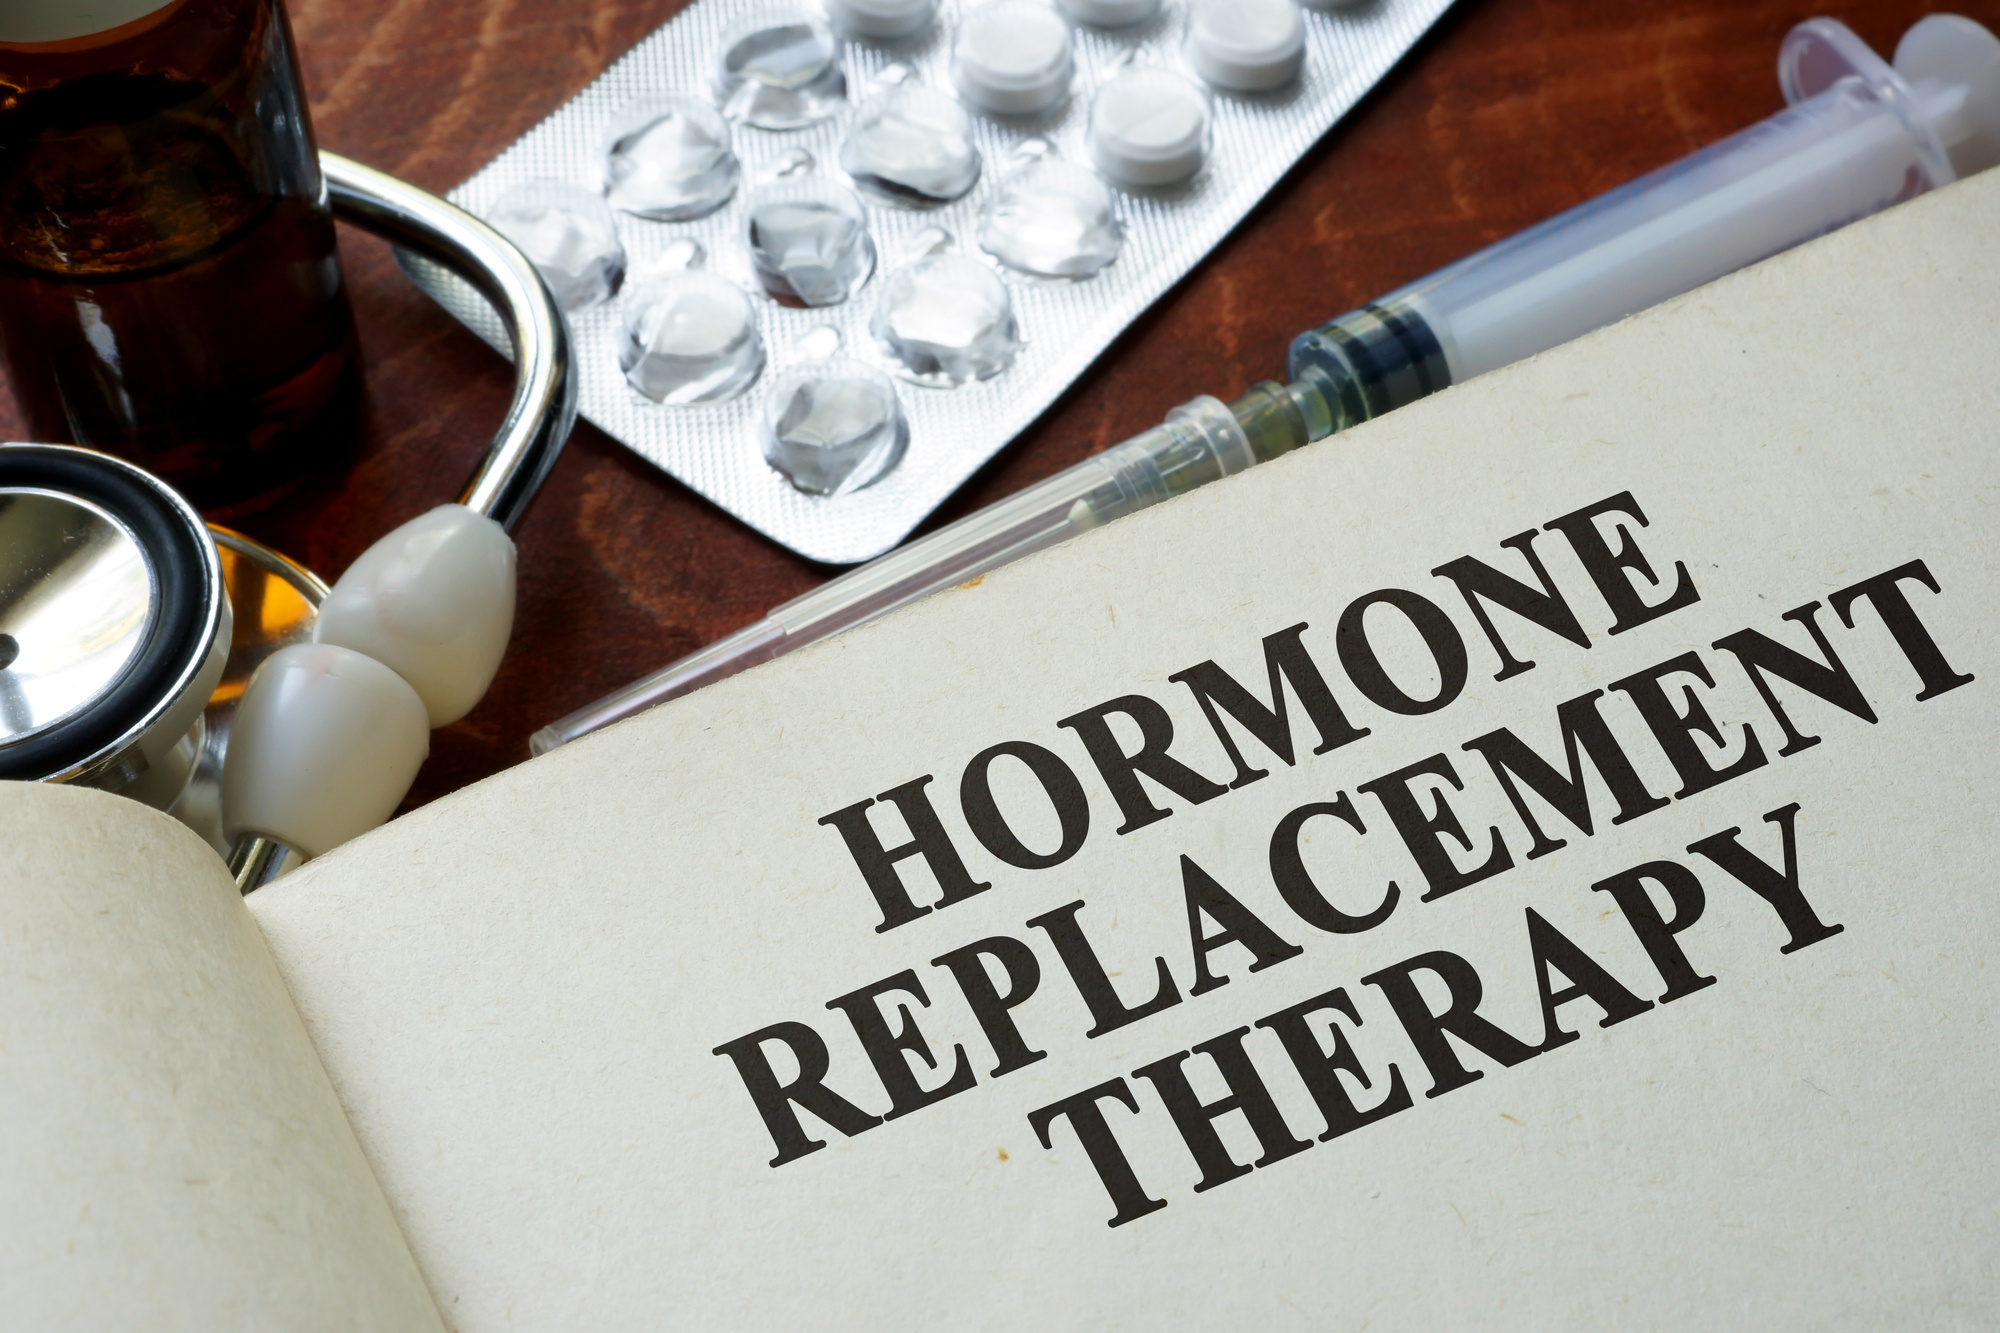 new research on hormone replacement therapy